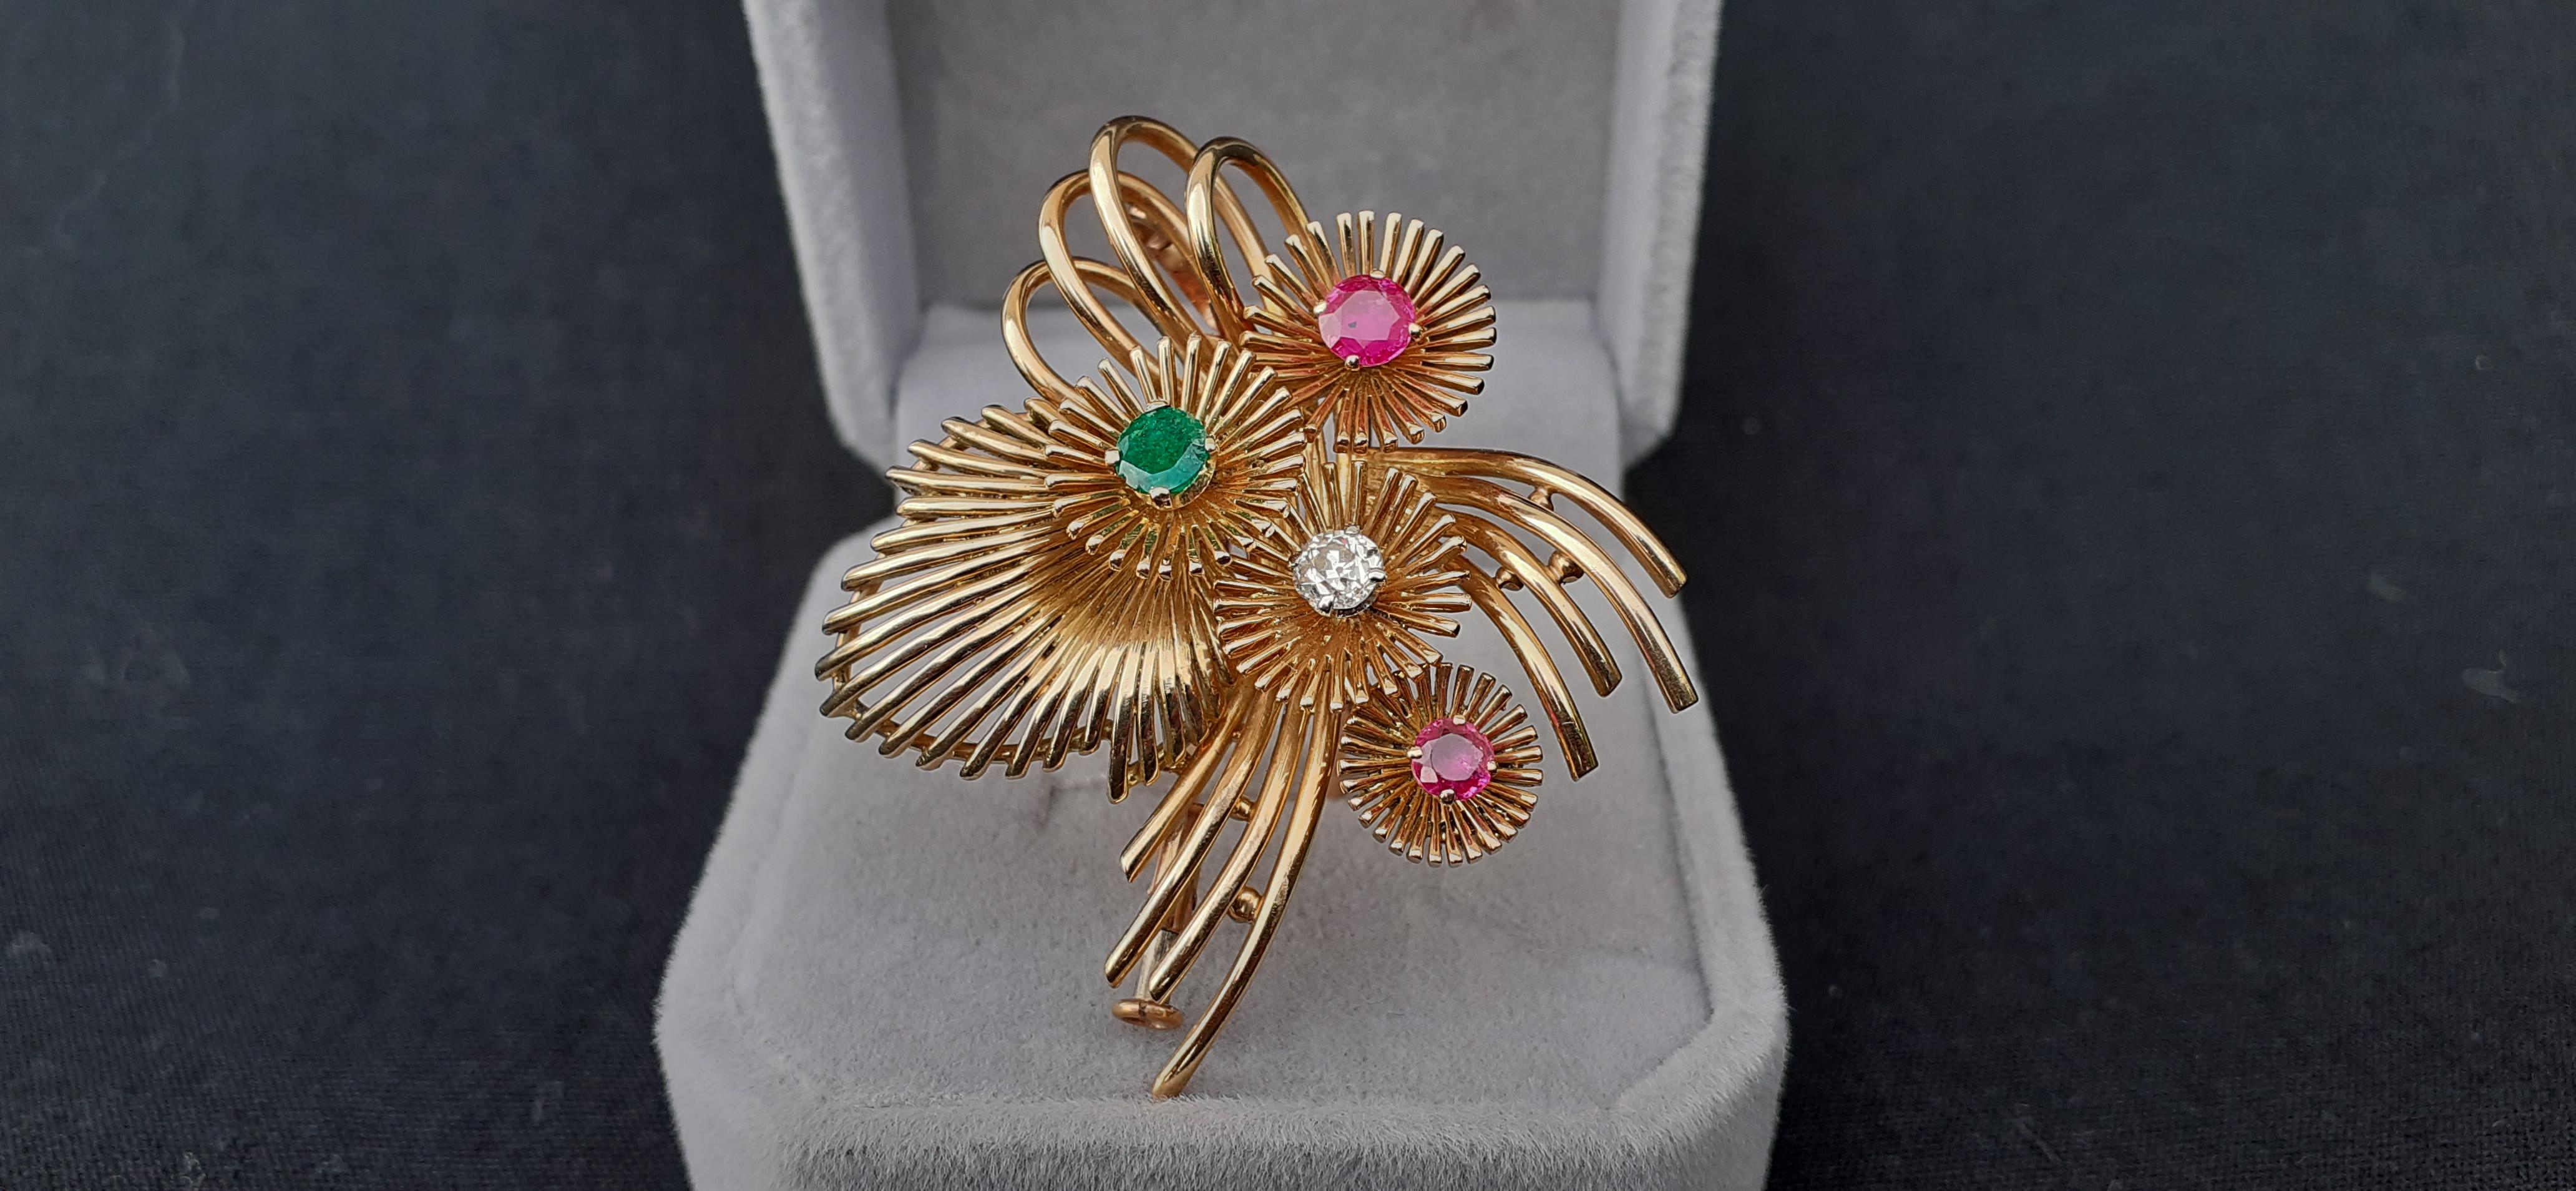 Sumptuous Bouquet of Flowers Lapel Pin Brooch in Gold and Gems For Sale 5